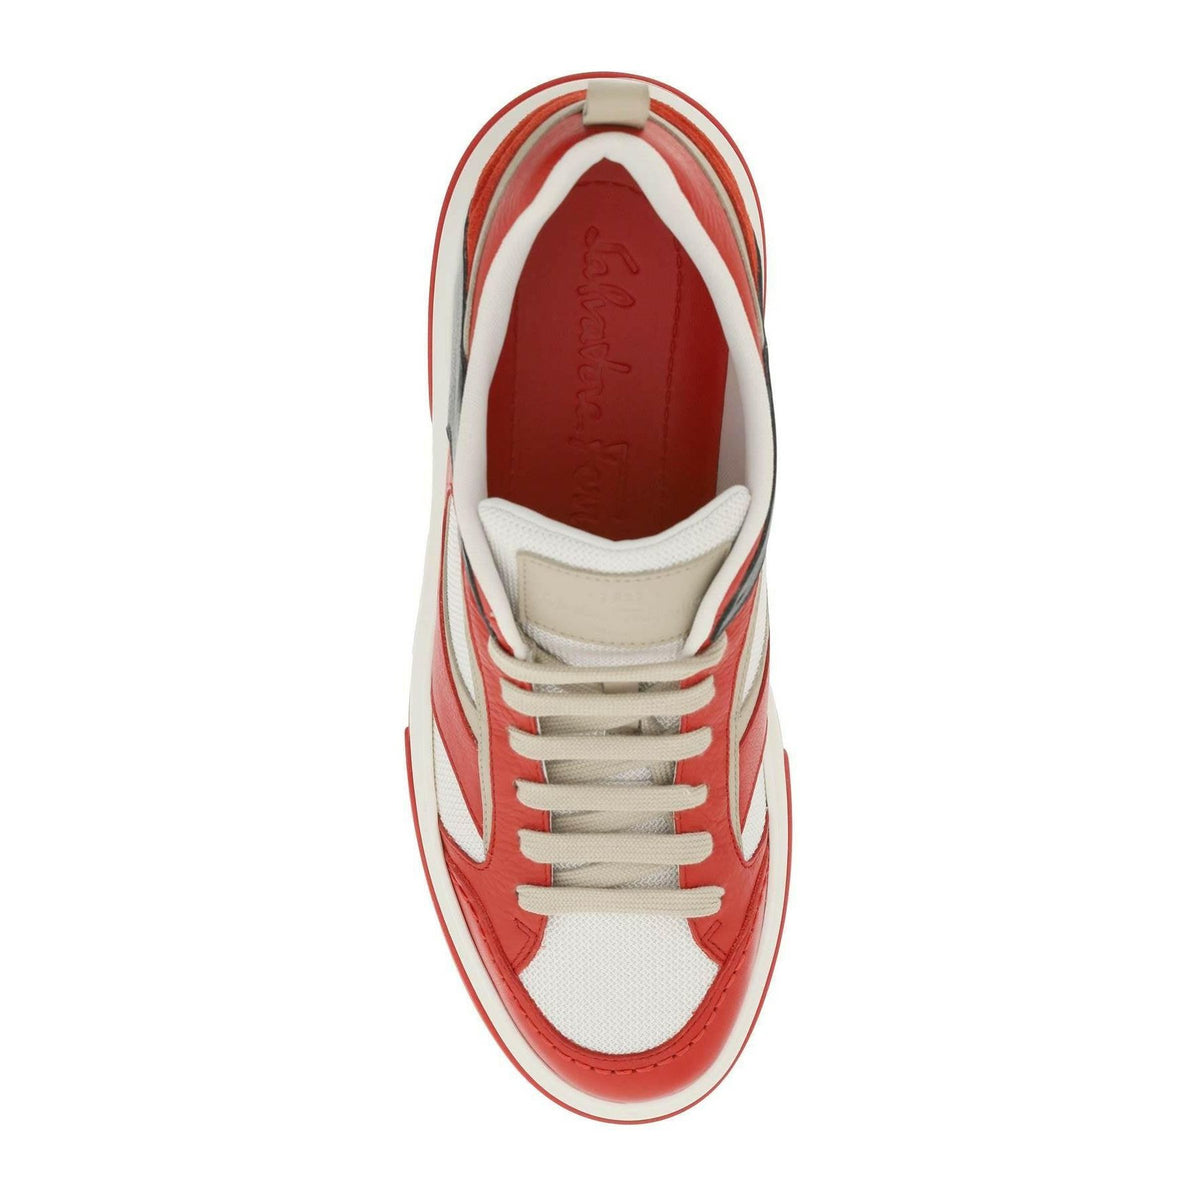 Flame Red and White Dennis Leather Sneakers FERRAGAMO JOHN JULIA.